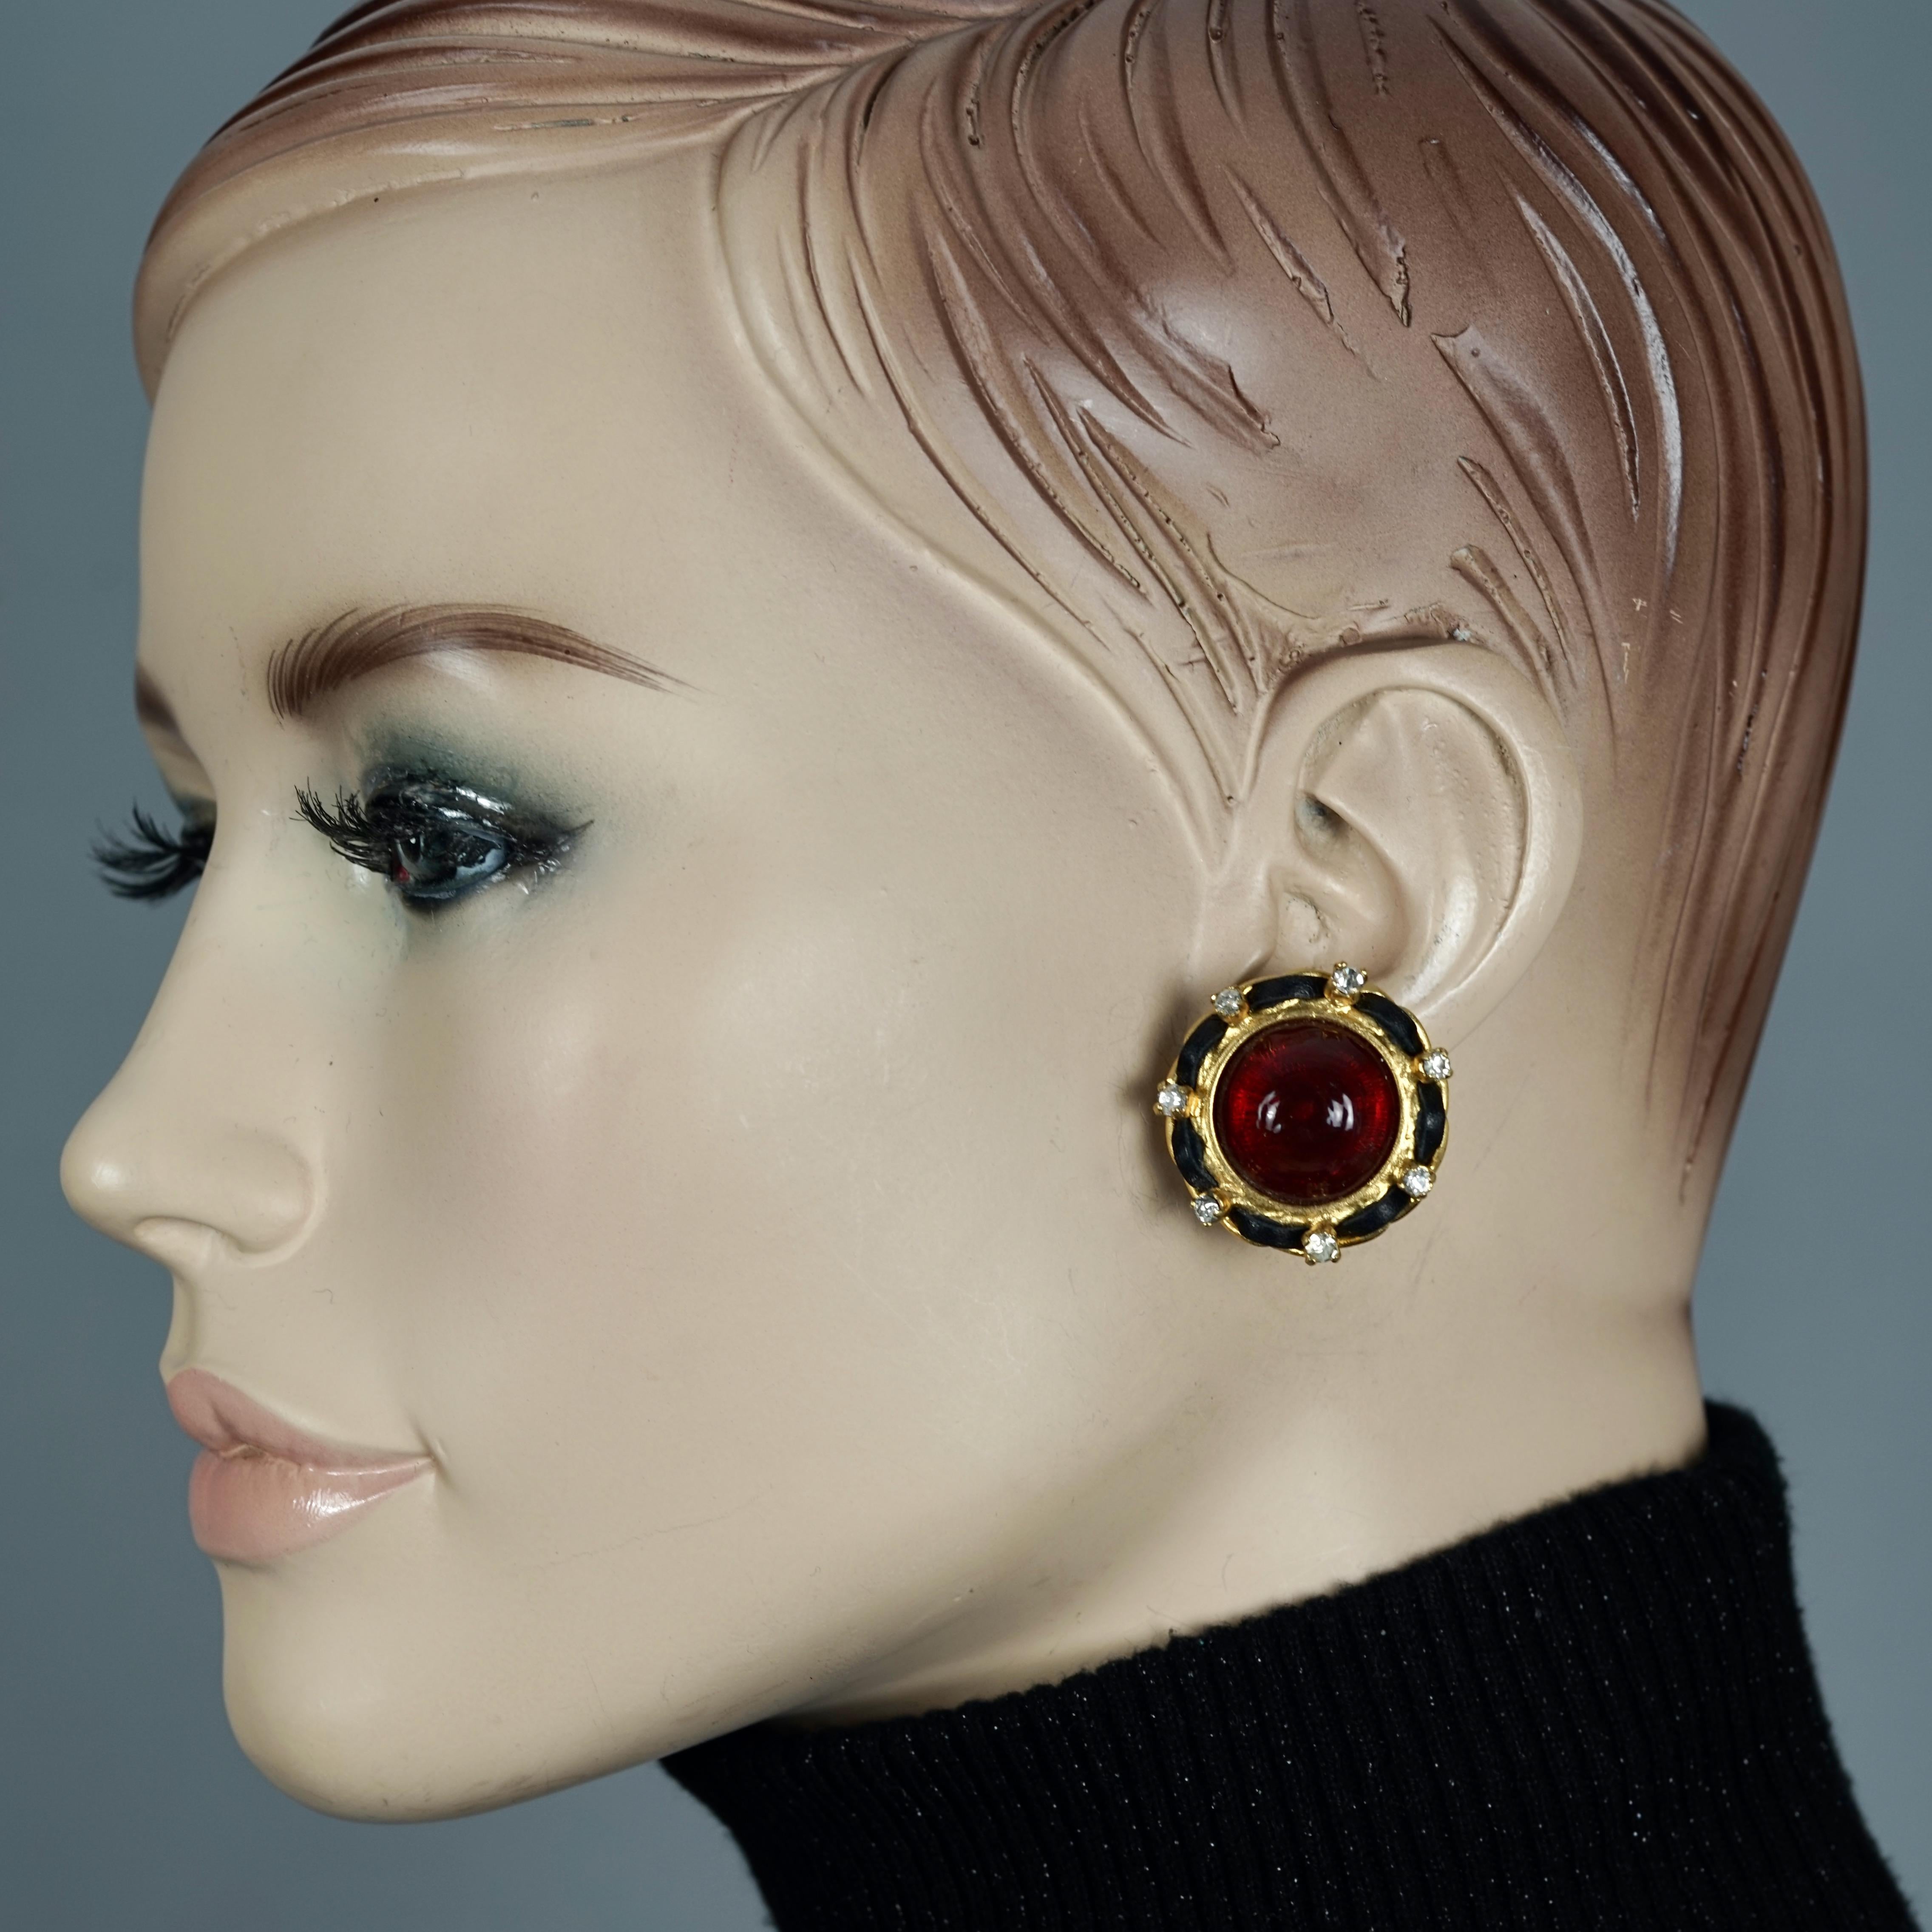 Vintage 1995 CHANEL Red Gripoix Rhinestone Leather Chain Earrings

Measurements:
Diameter: 1.10 inches (2.8 cm)
Depth: 0.35 inch (0.9 cm)
Weight per Earring: 14 grams

Features:
- 100% Authentic CHANEL.
- Classic Chanel red Gripoix with leather and